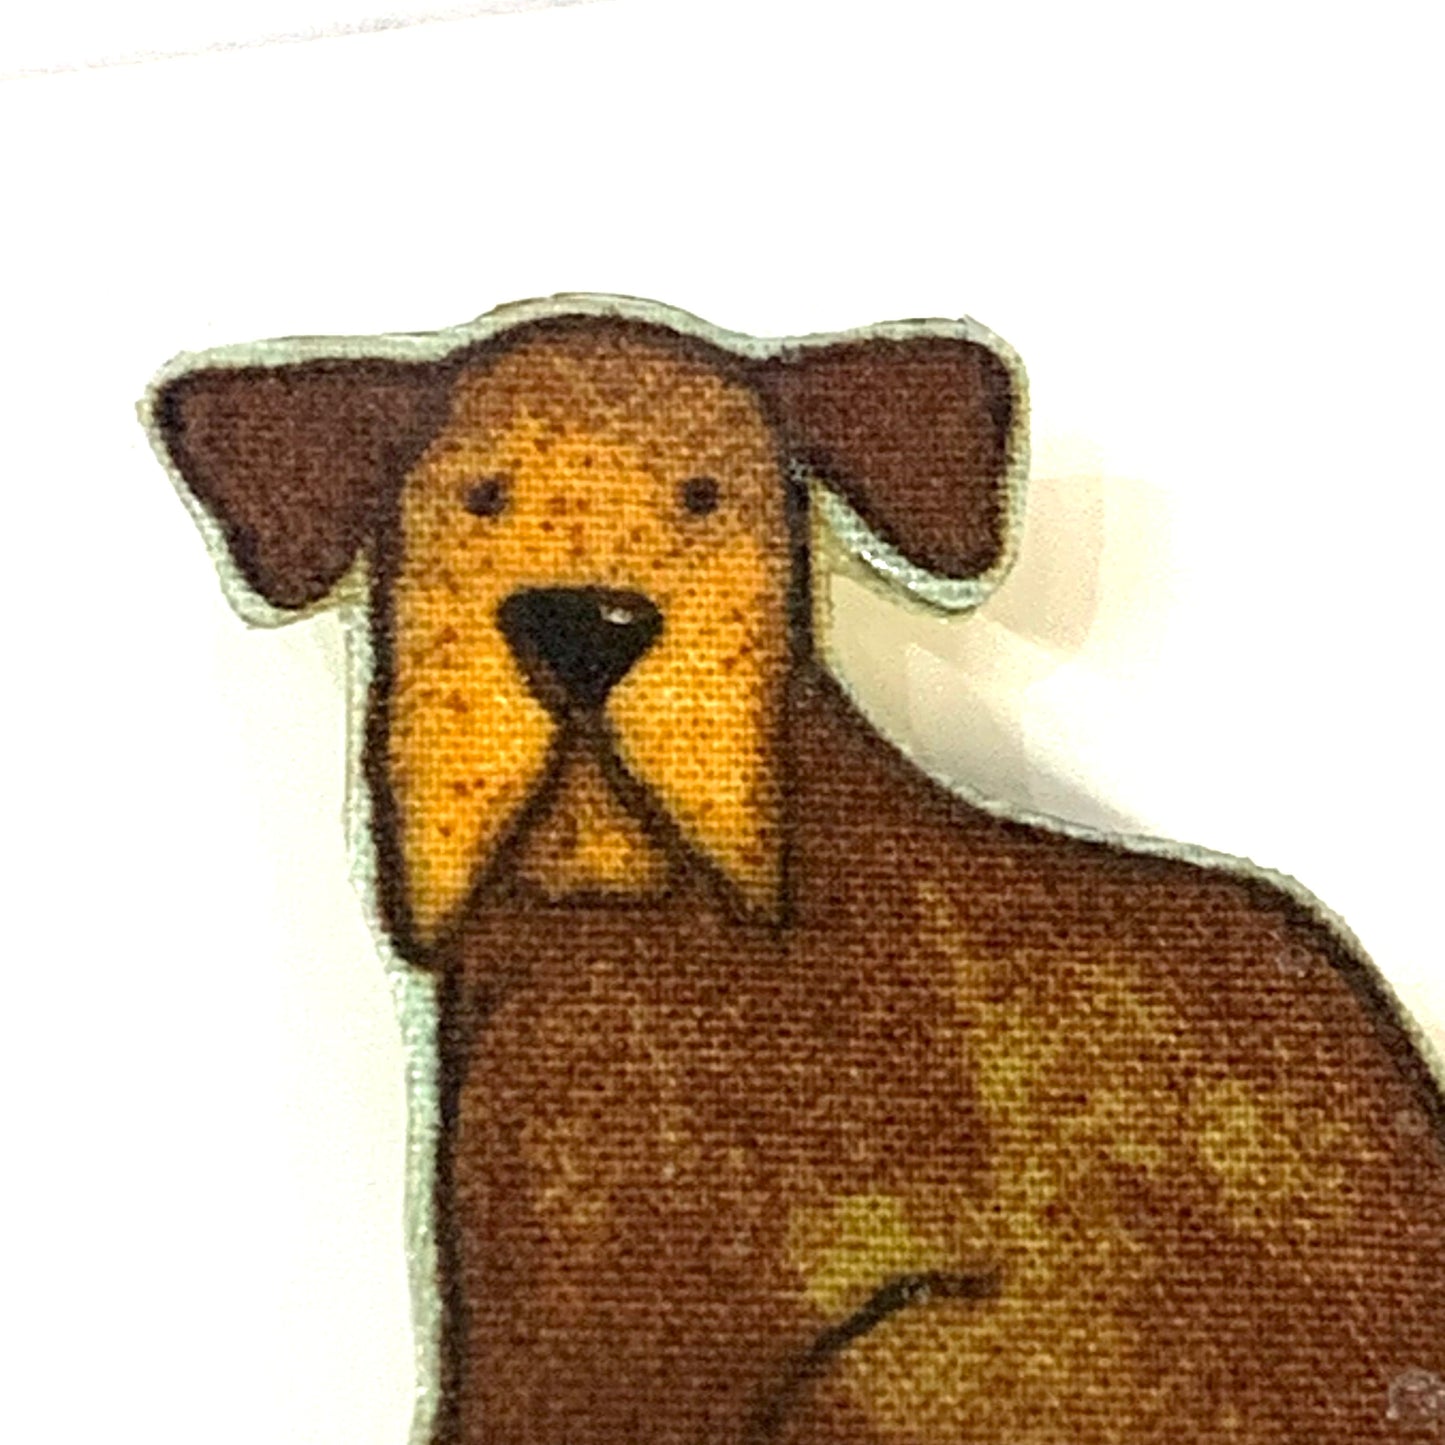 THIS BIRD HAS FLOWN- Fabric Remnant Brooches- Sitting Up Brown Doggo